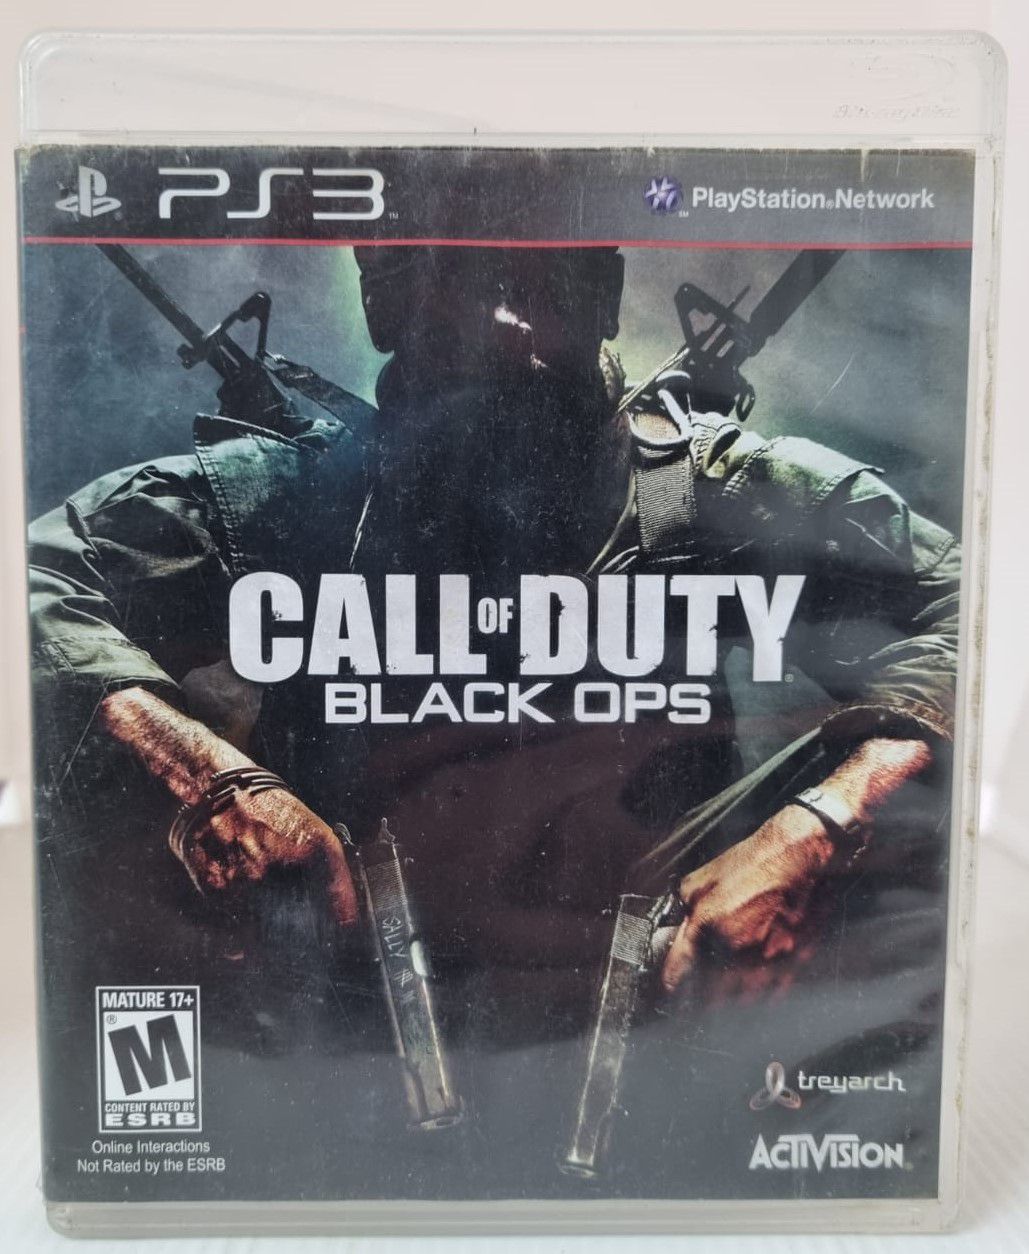 Game Call of Duty: Black Ops II - PS3 - Activision - GAMES E CONSOLES -  GAME PS3 PS4 : PC Informática